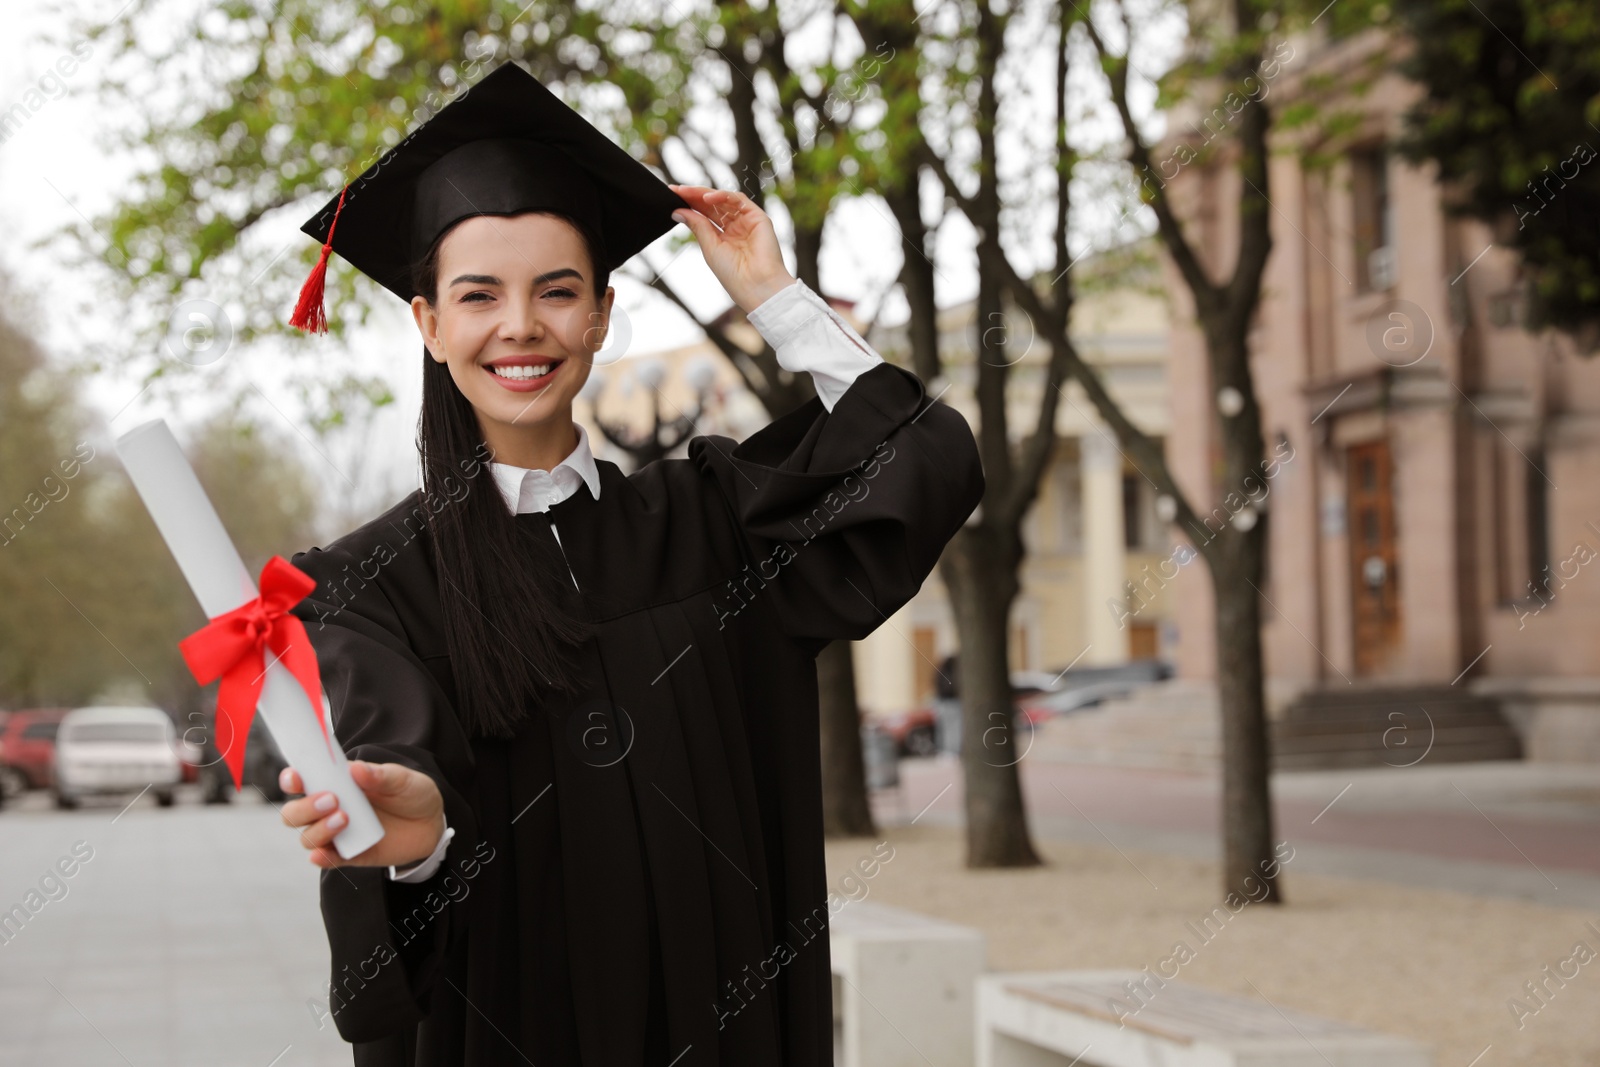 Photo of Happy student with diploma after graduation ceremony outdoors. Space for text